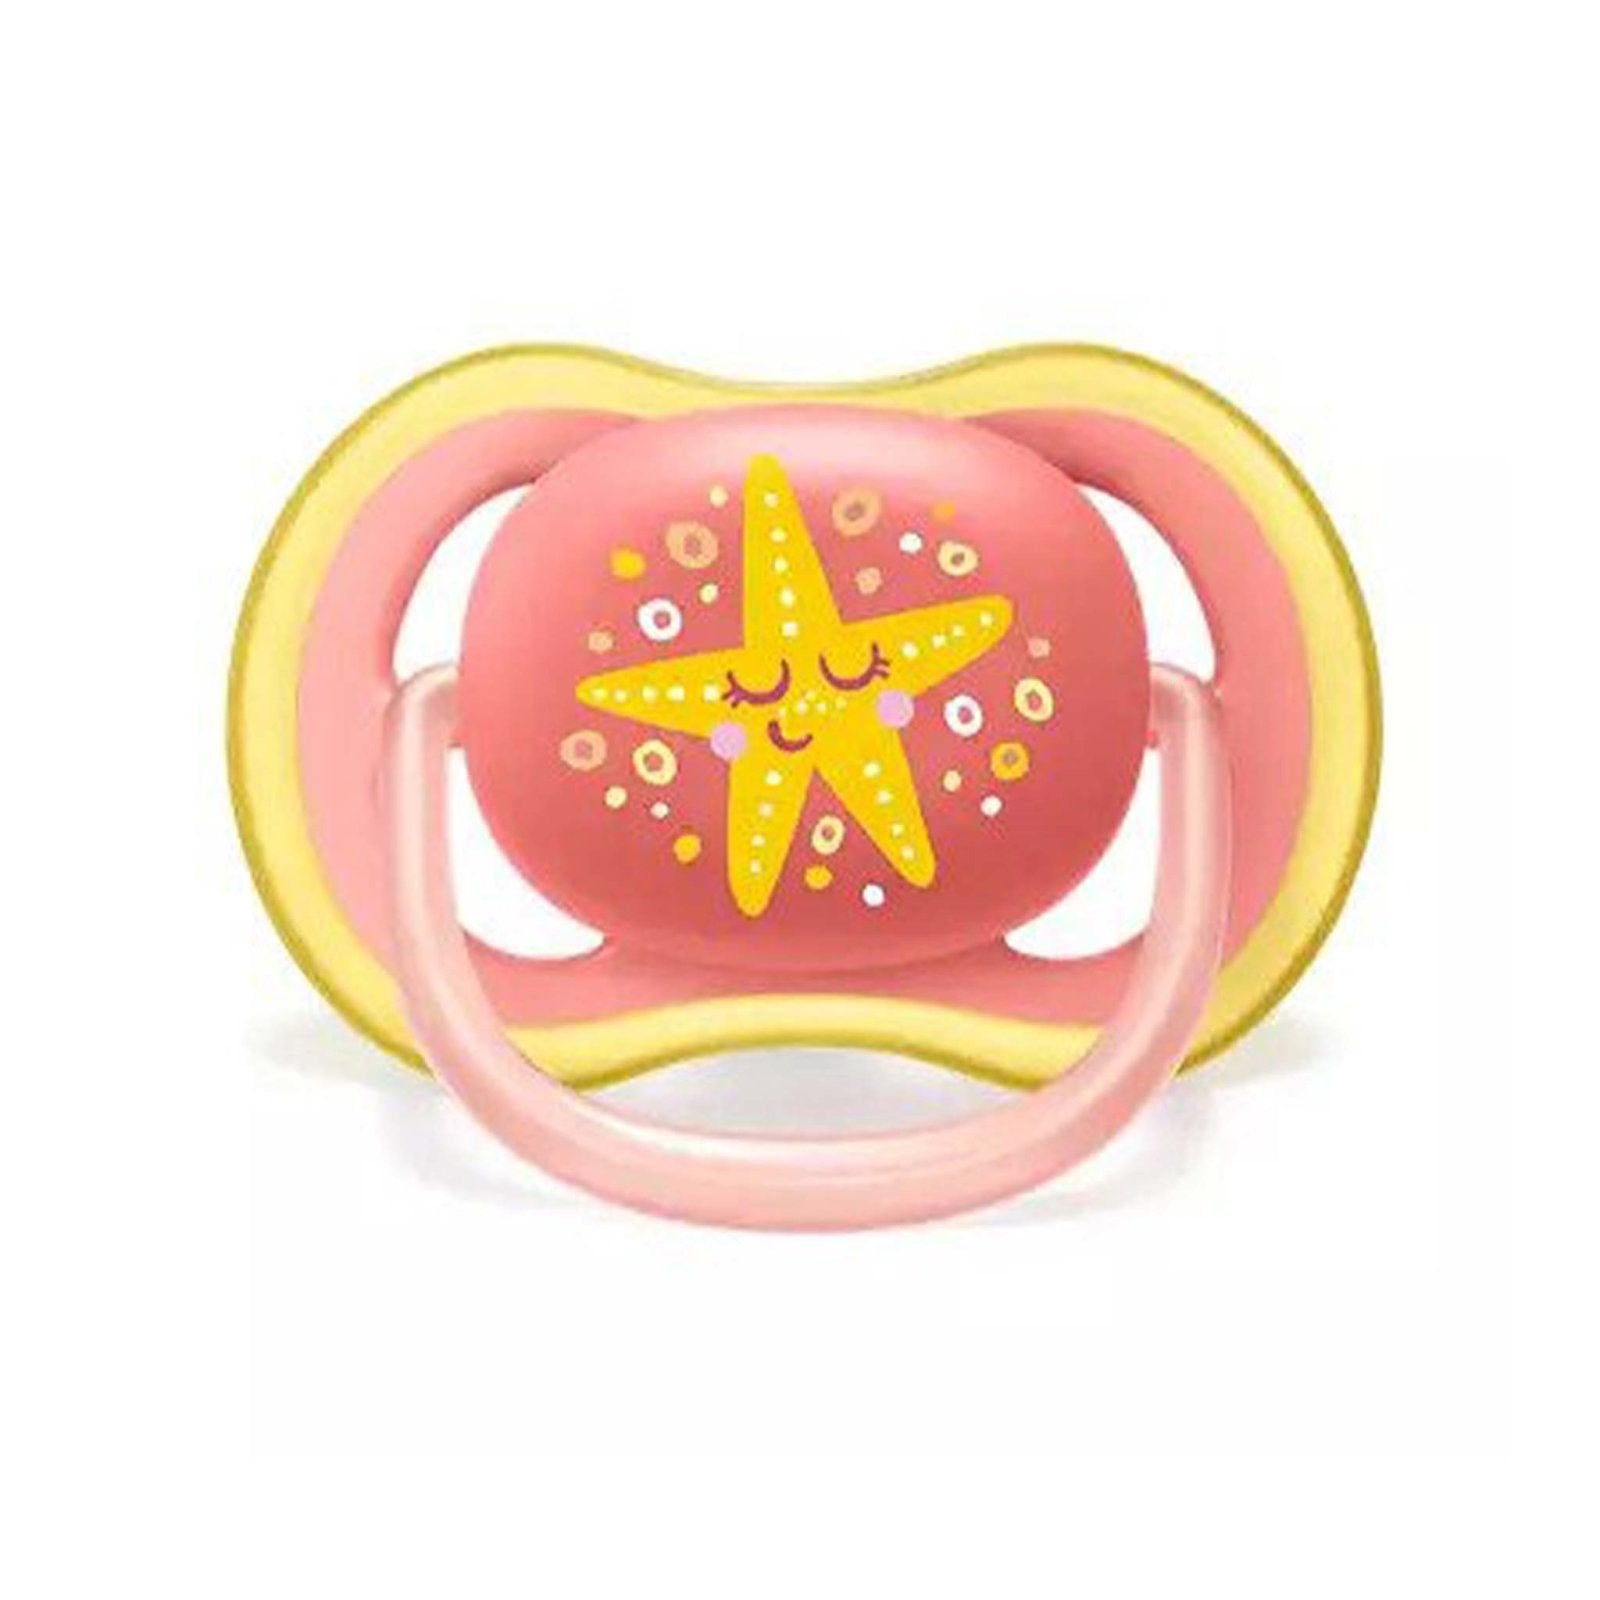 Ultra Air pacifier Star Print by Avent